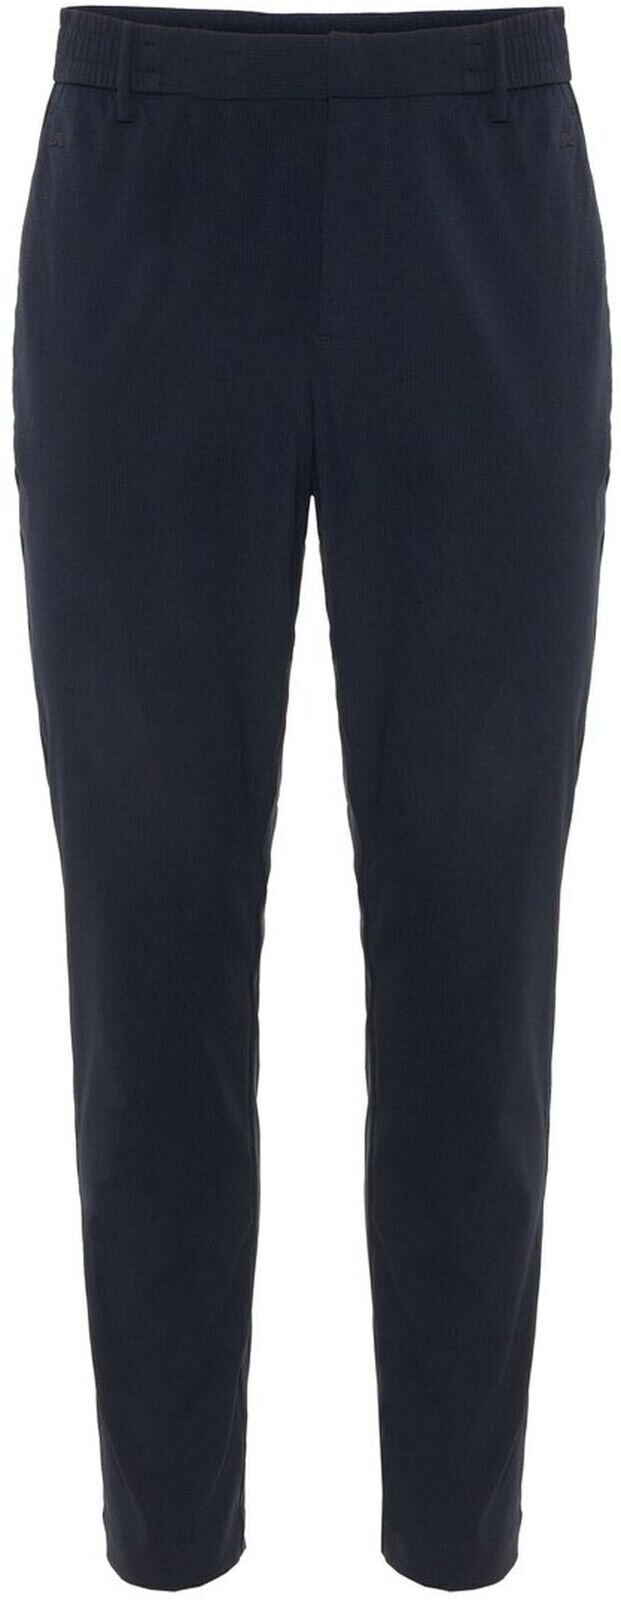 Trousers J.Lindeberg Austin High Vent Mens Trousers Navy 34/32